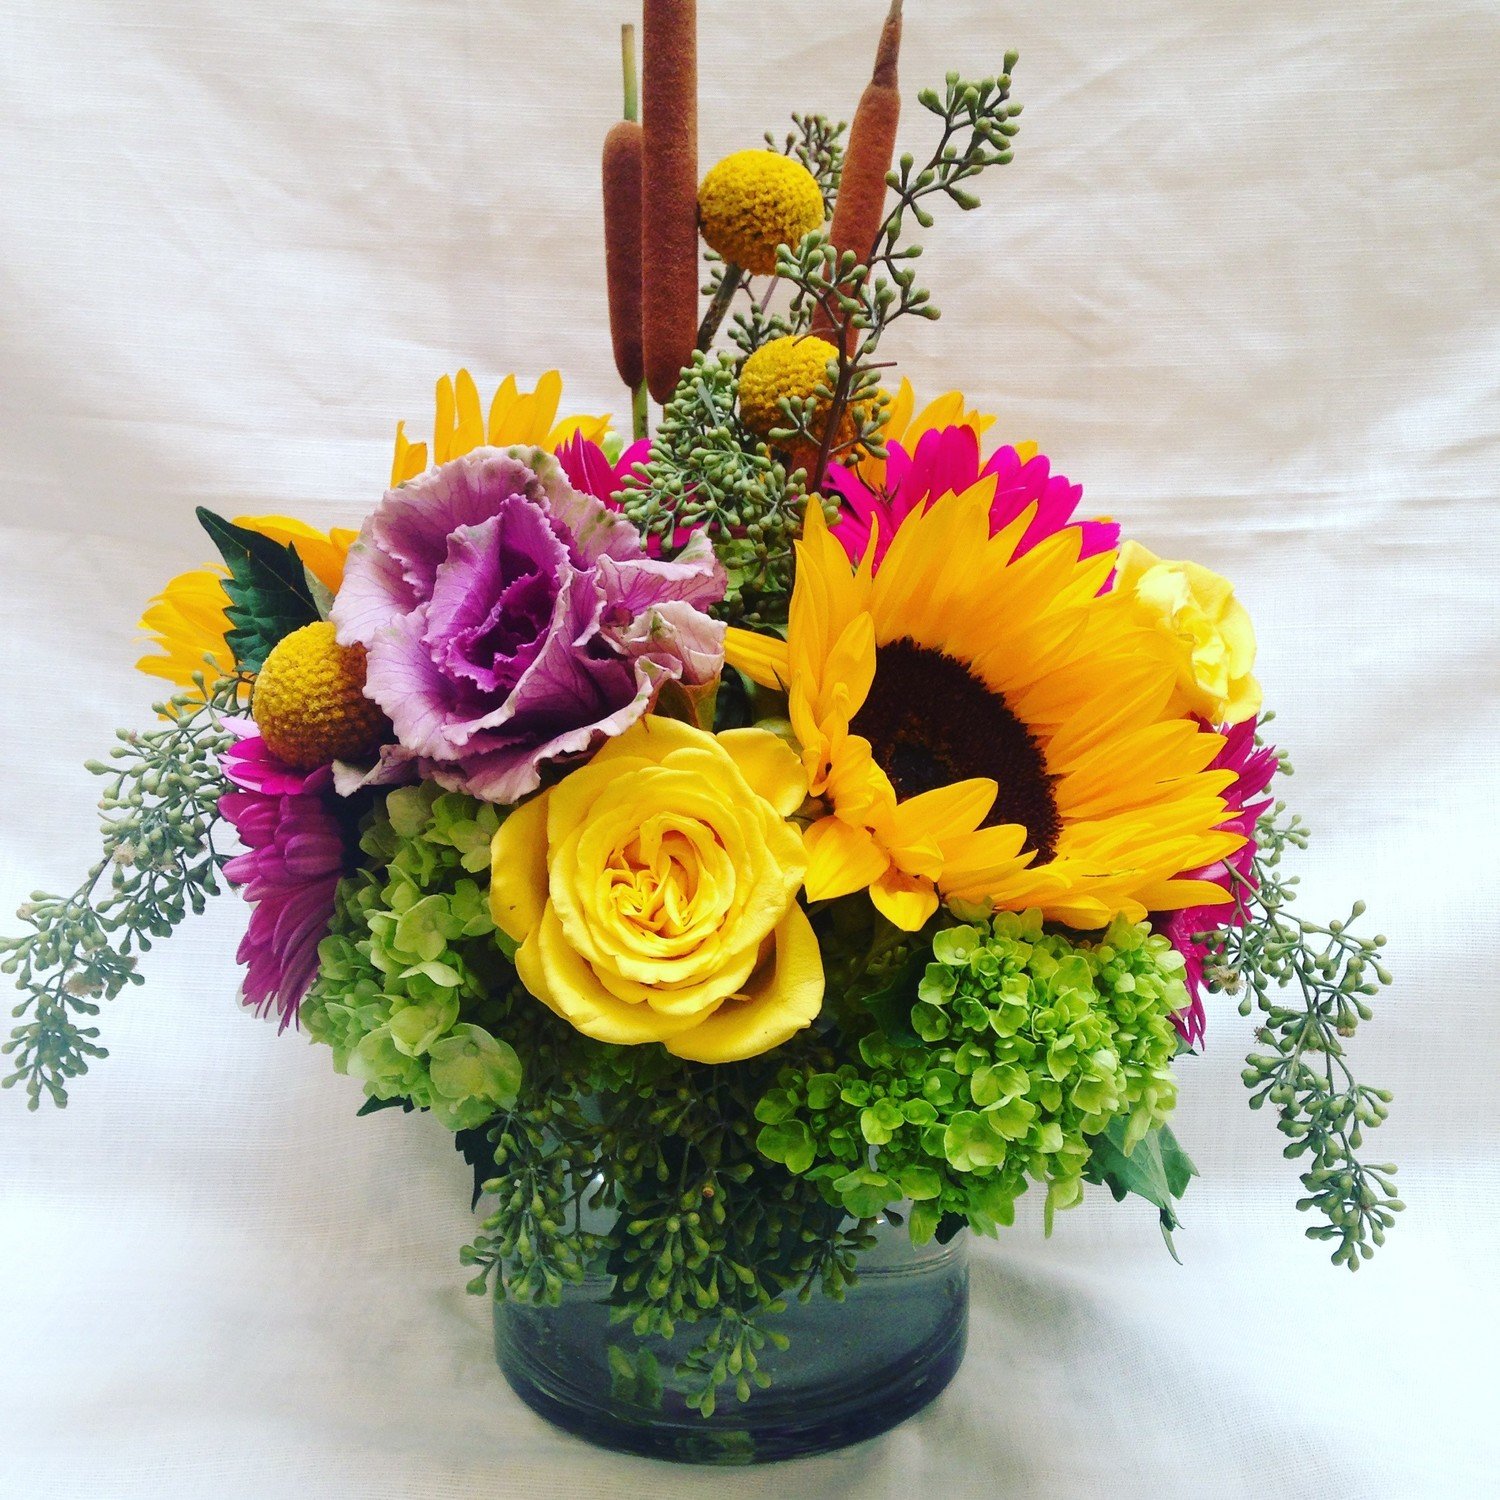 Fall In Love by Twigs Floral Design